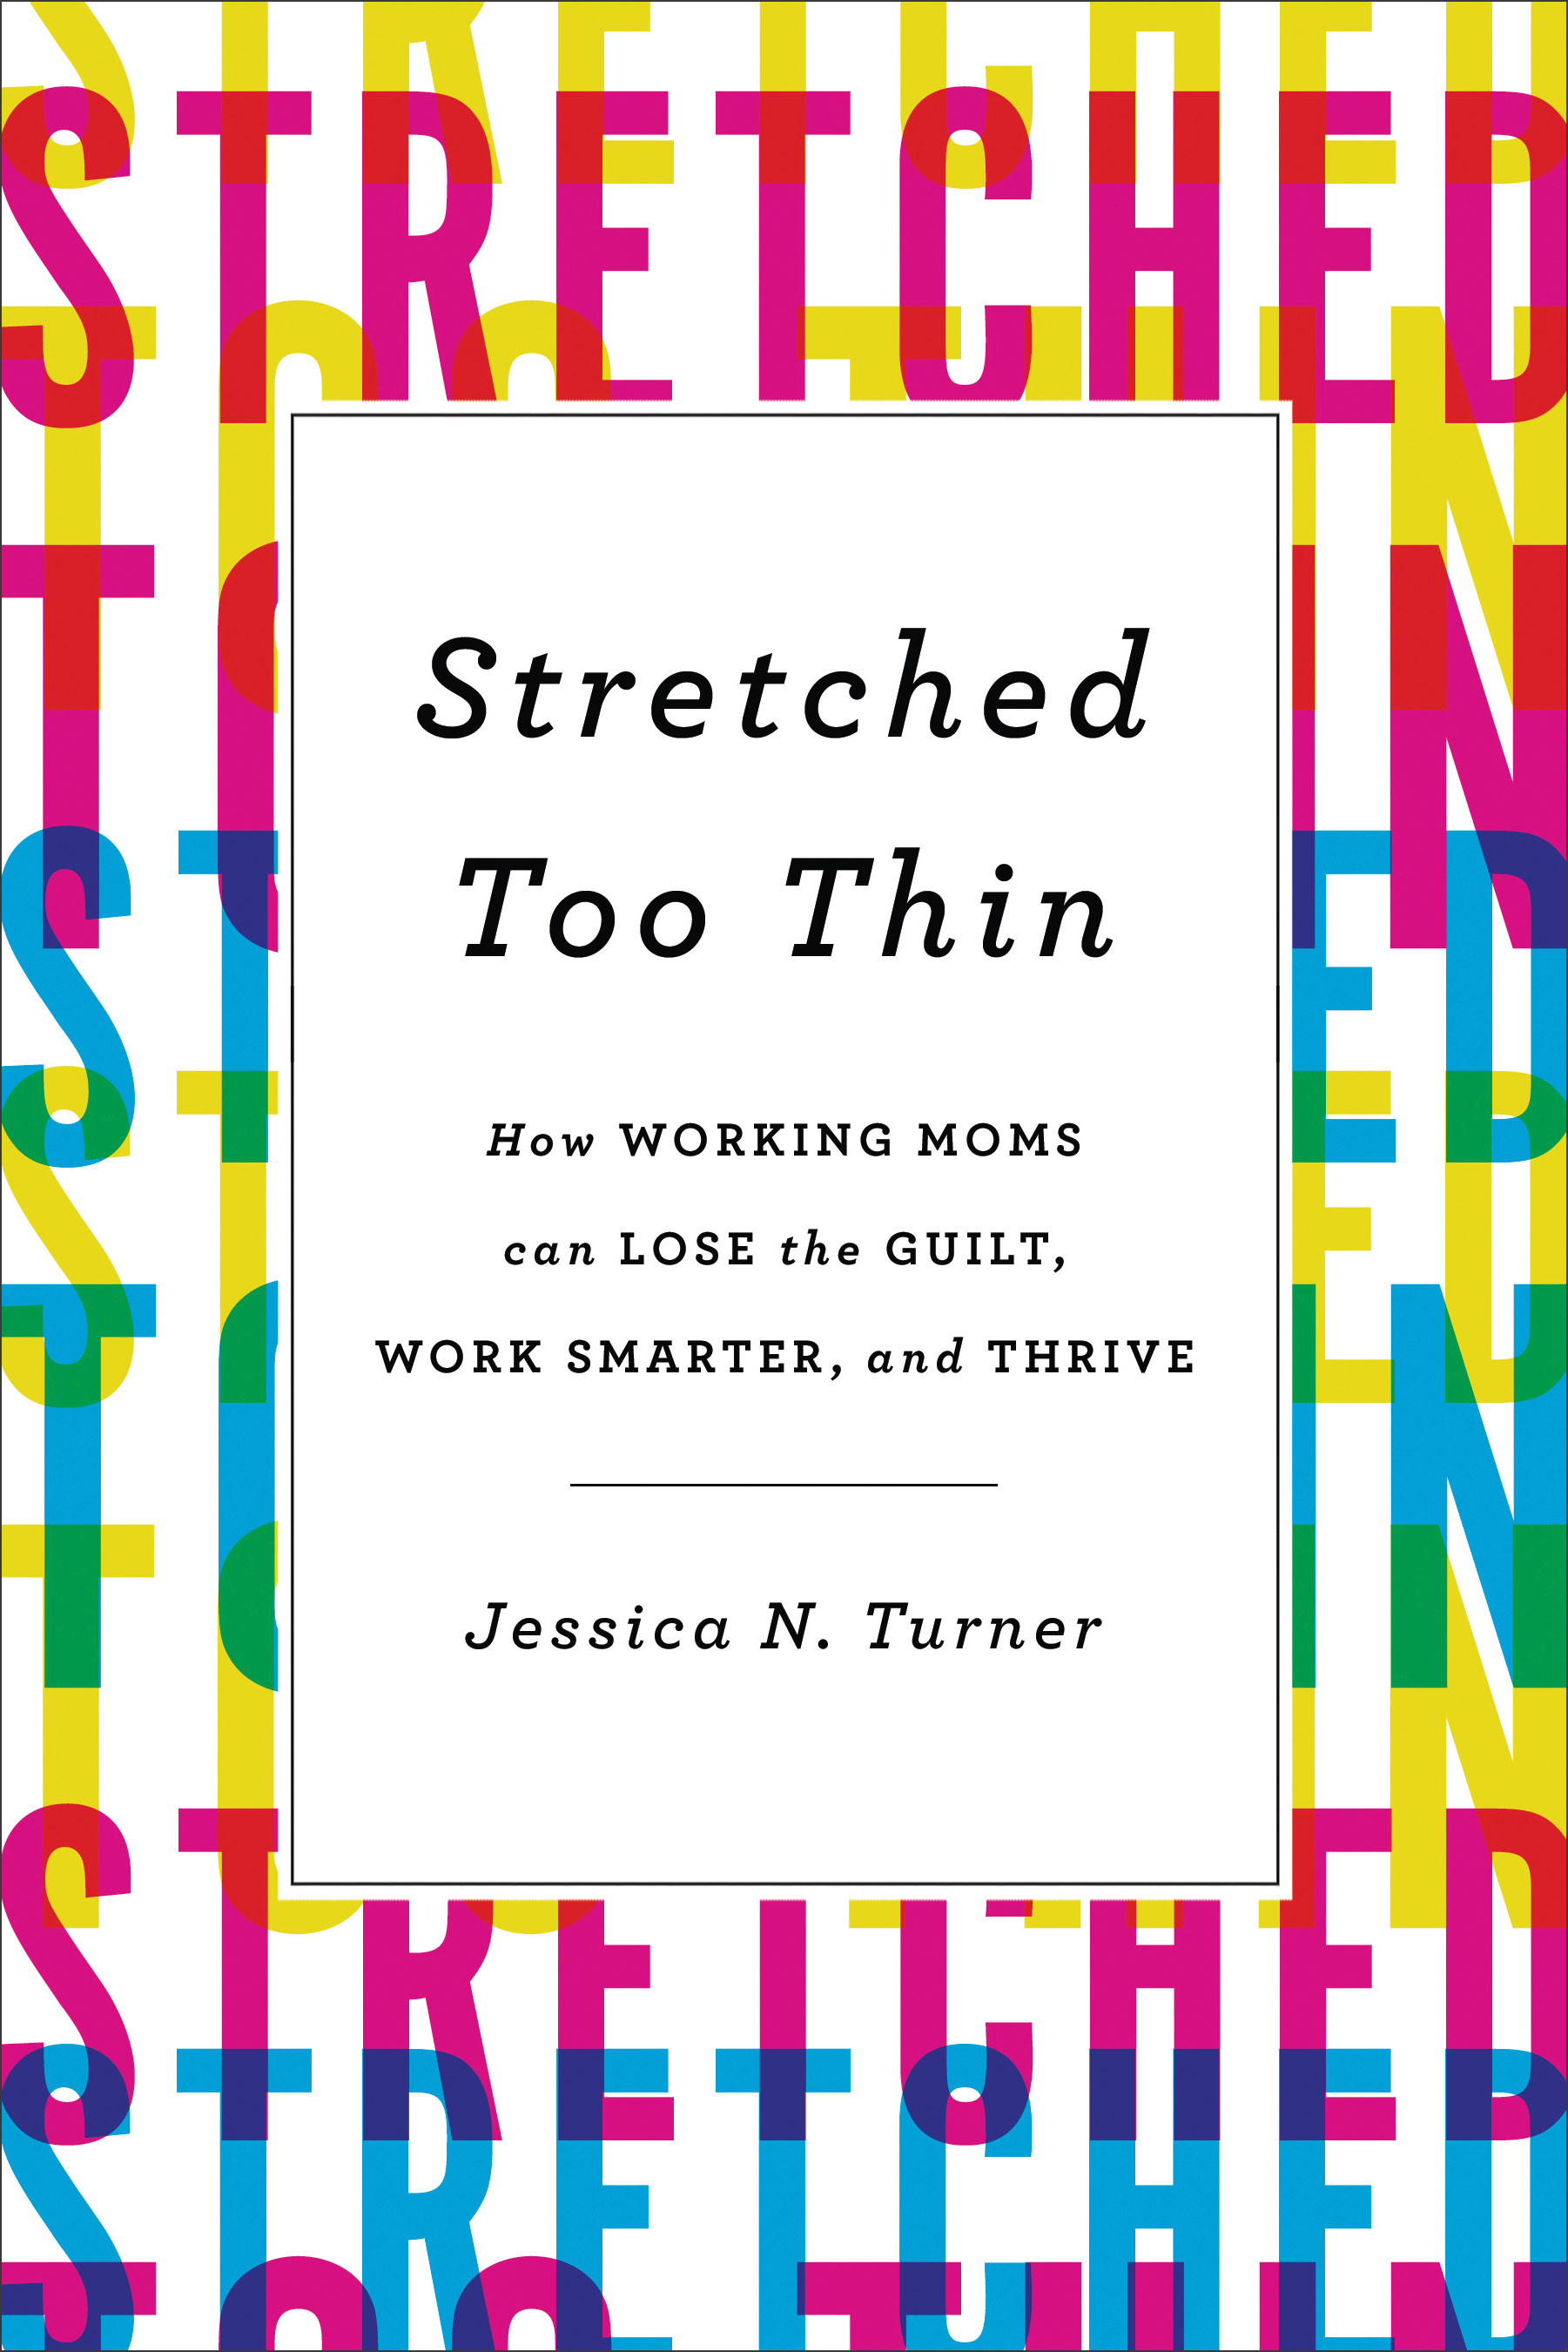 "Stretched Too Thin: How Working Moms Can Lose the Guilt, Work Smarter, and Thrive." (Used by permission from Revell, a division of Baker Publishing Group)